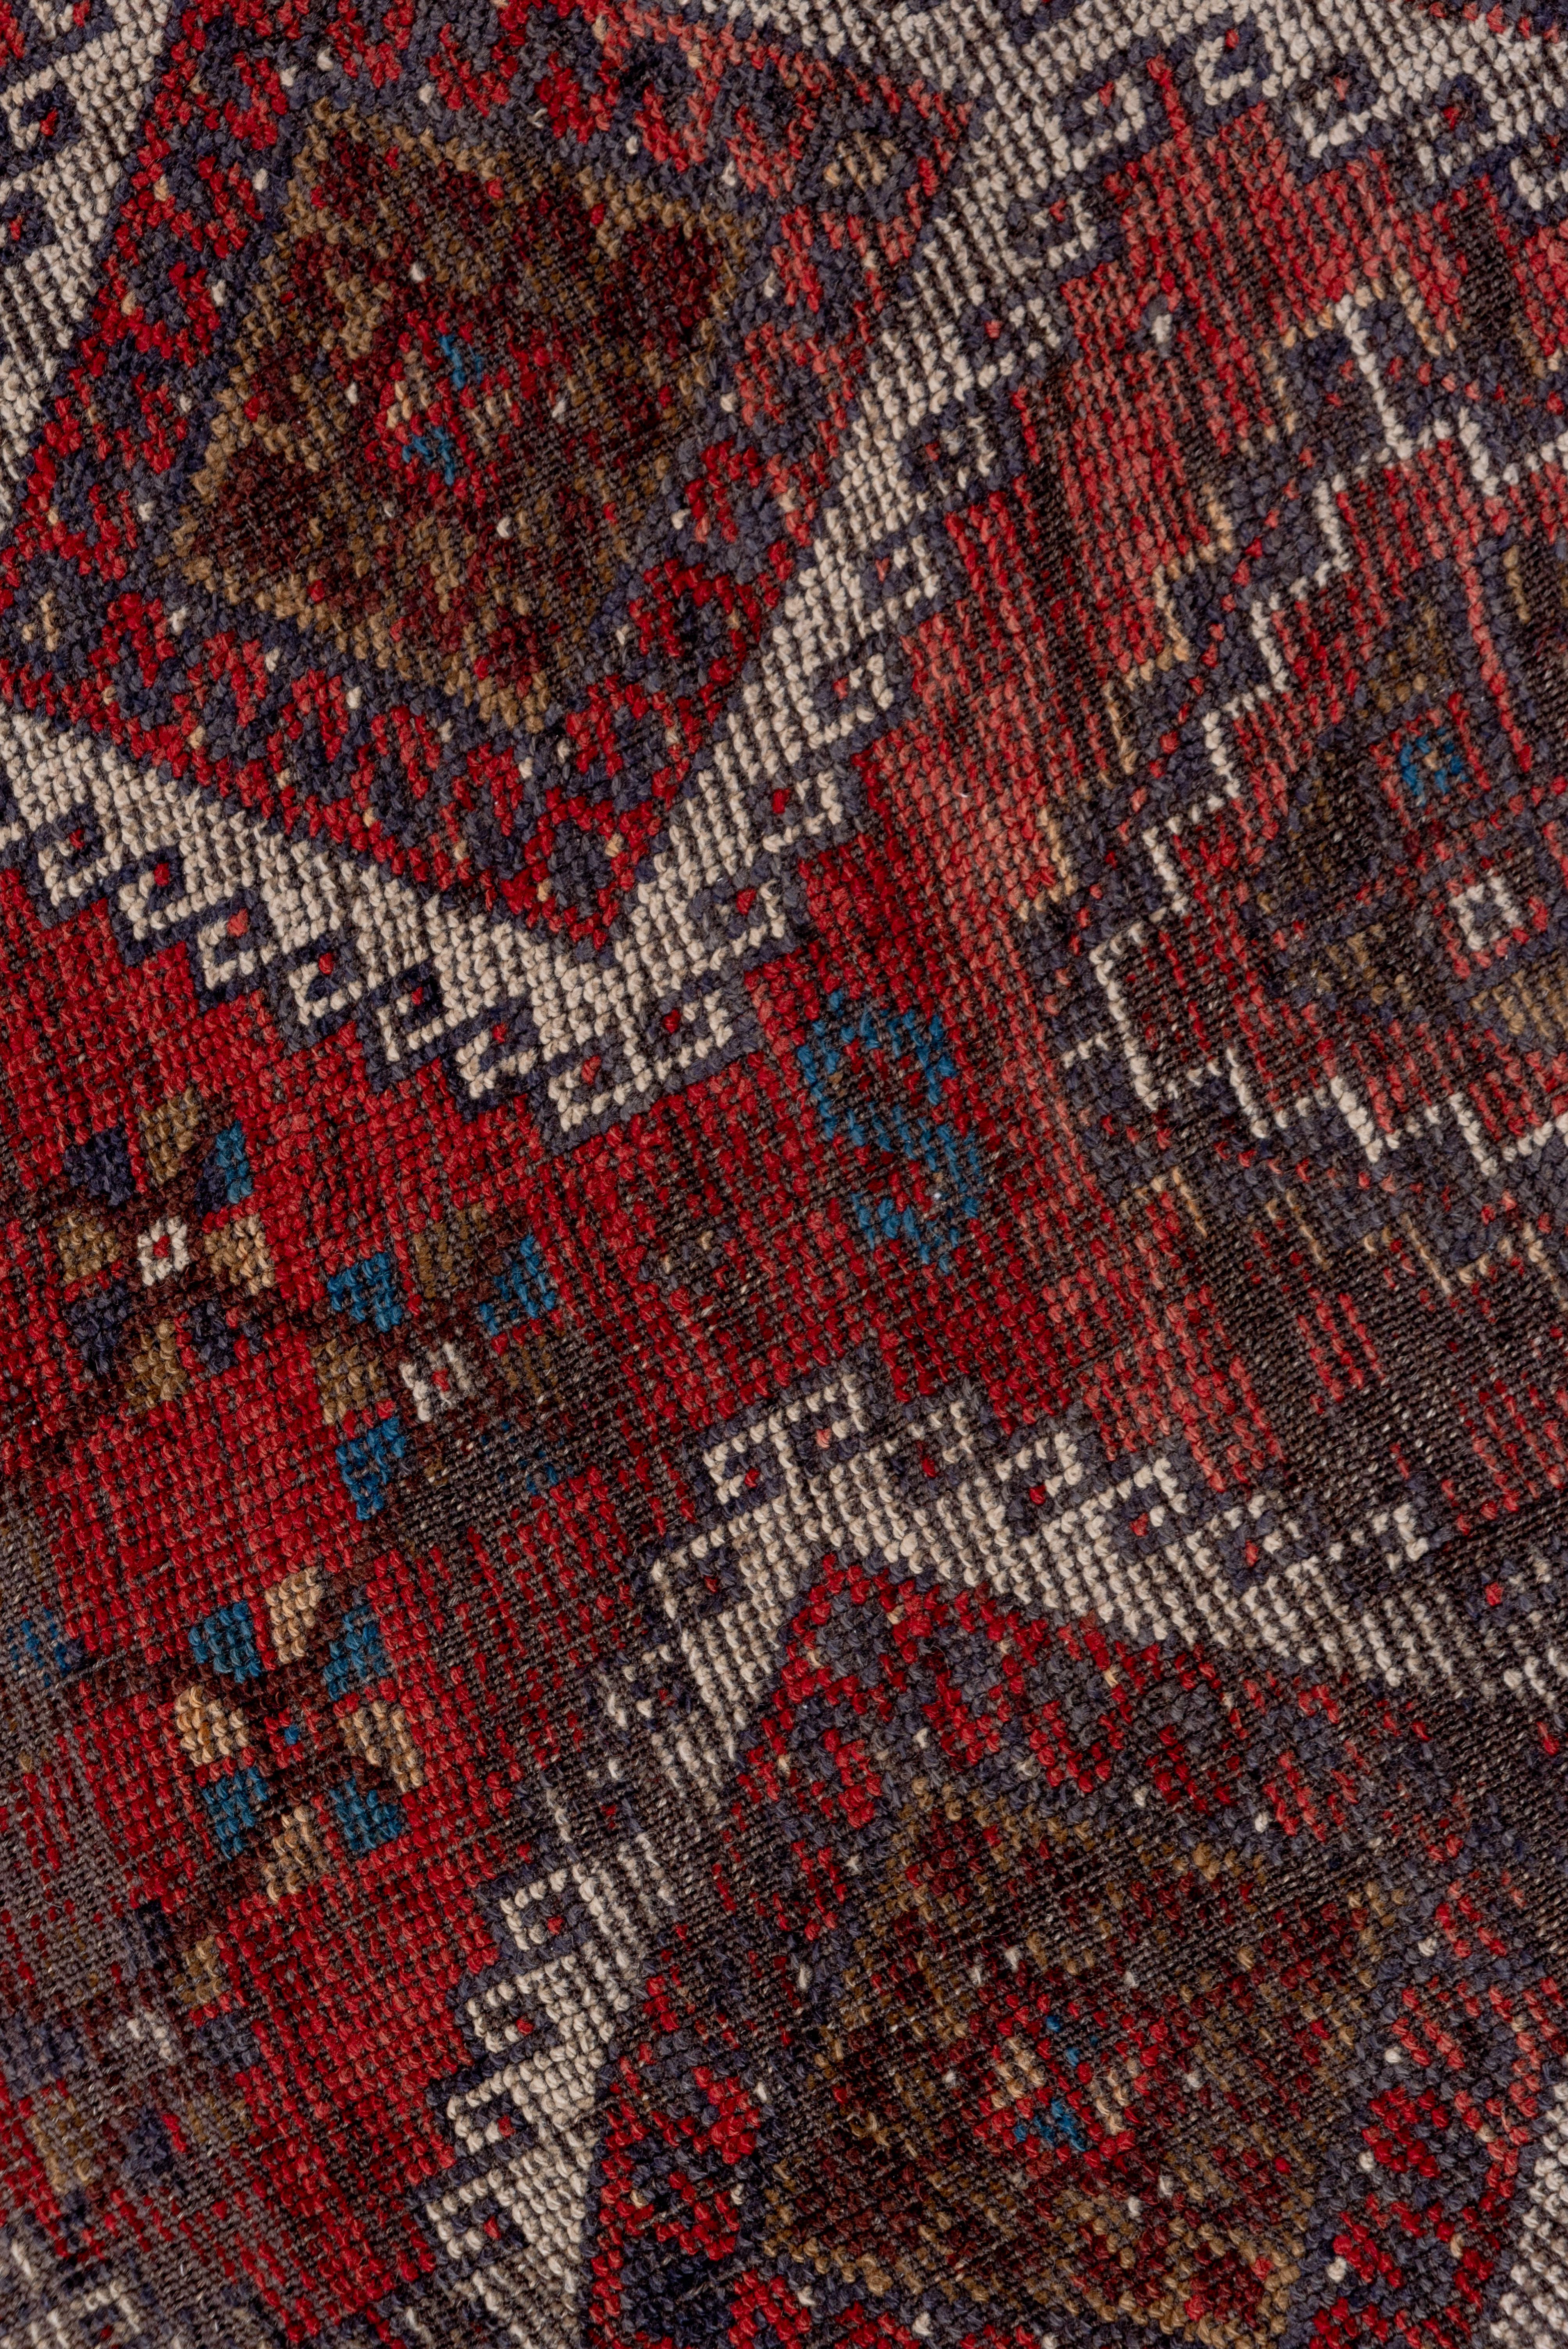 An east Anatolian long rug with two columns of six attached, hooked ivory diamonds forming pole medallions on the red field, with rosette groups and nested, stepped diamonds as secondary devices. Narrow blue main border with meandering vine with